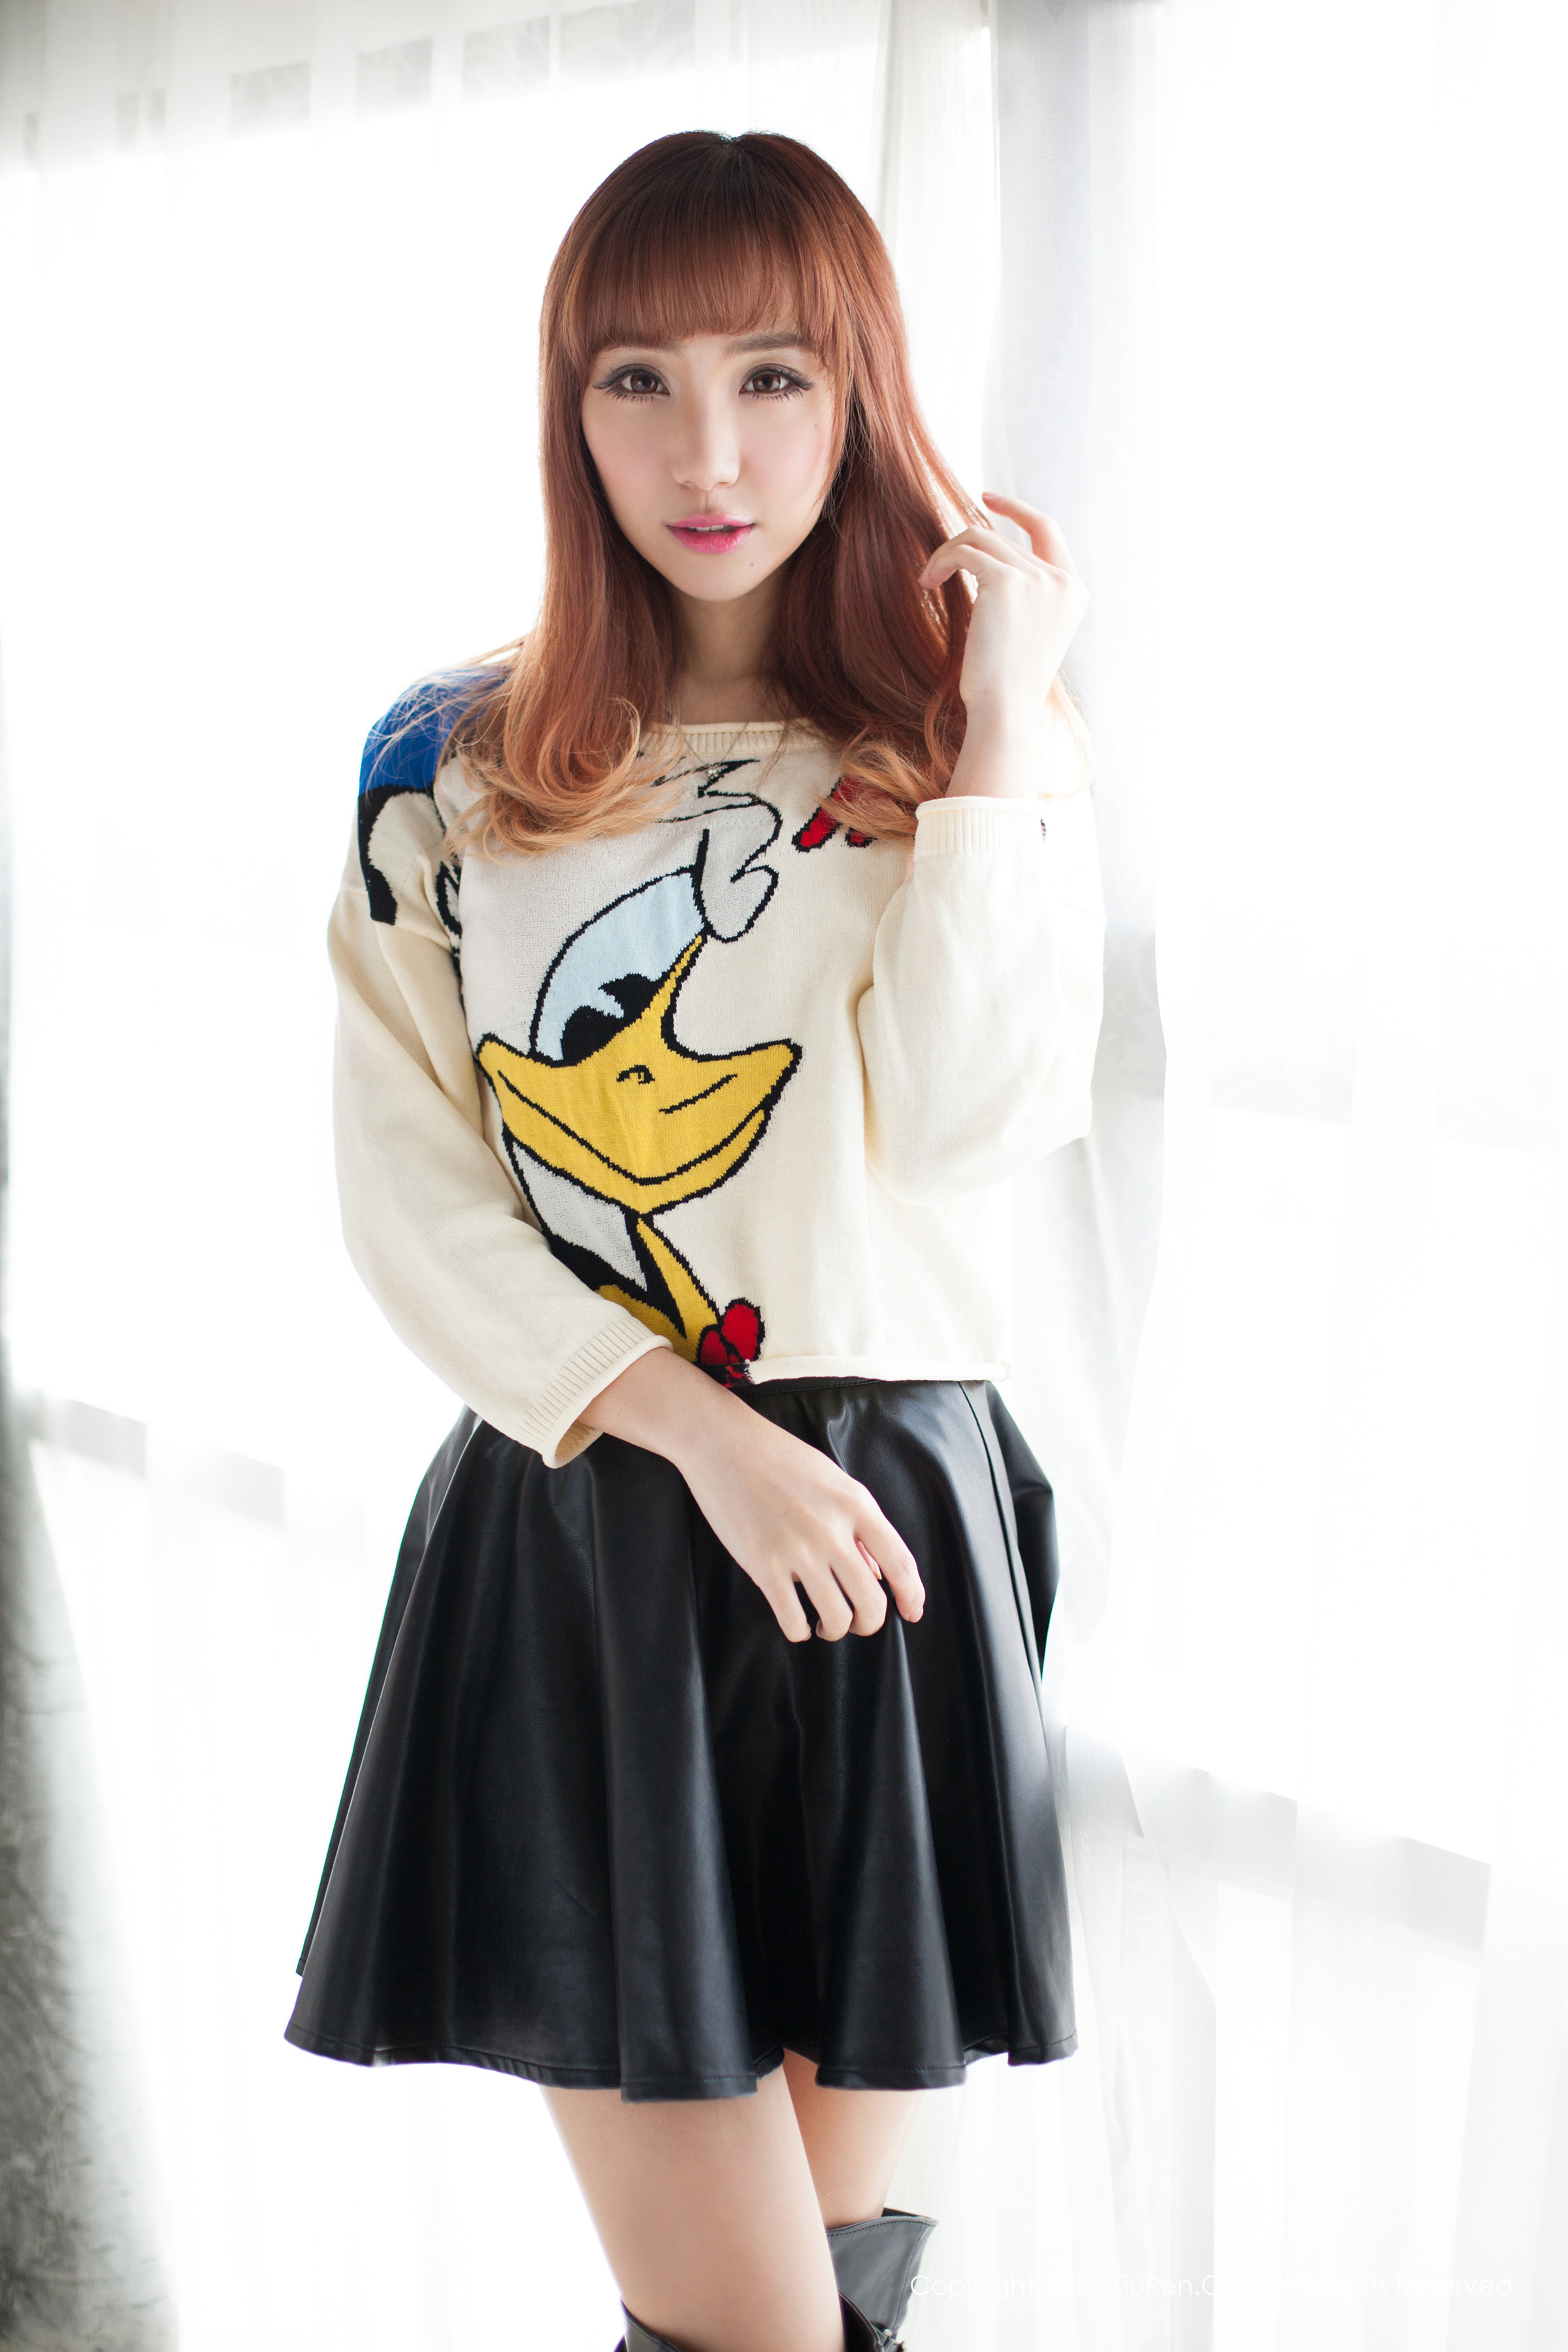 Women Asian Chinese Model Long Hair Leather Skirts Donald Duck Sweater 2400x3600